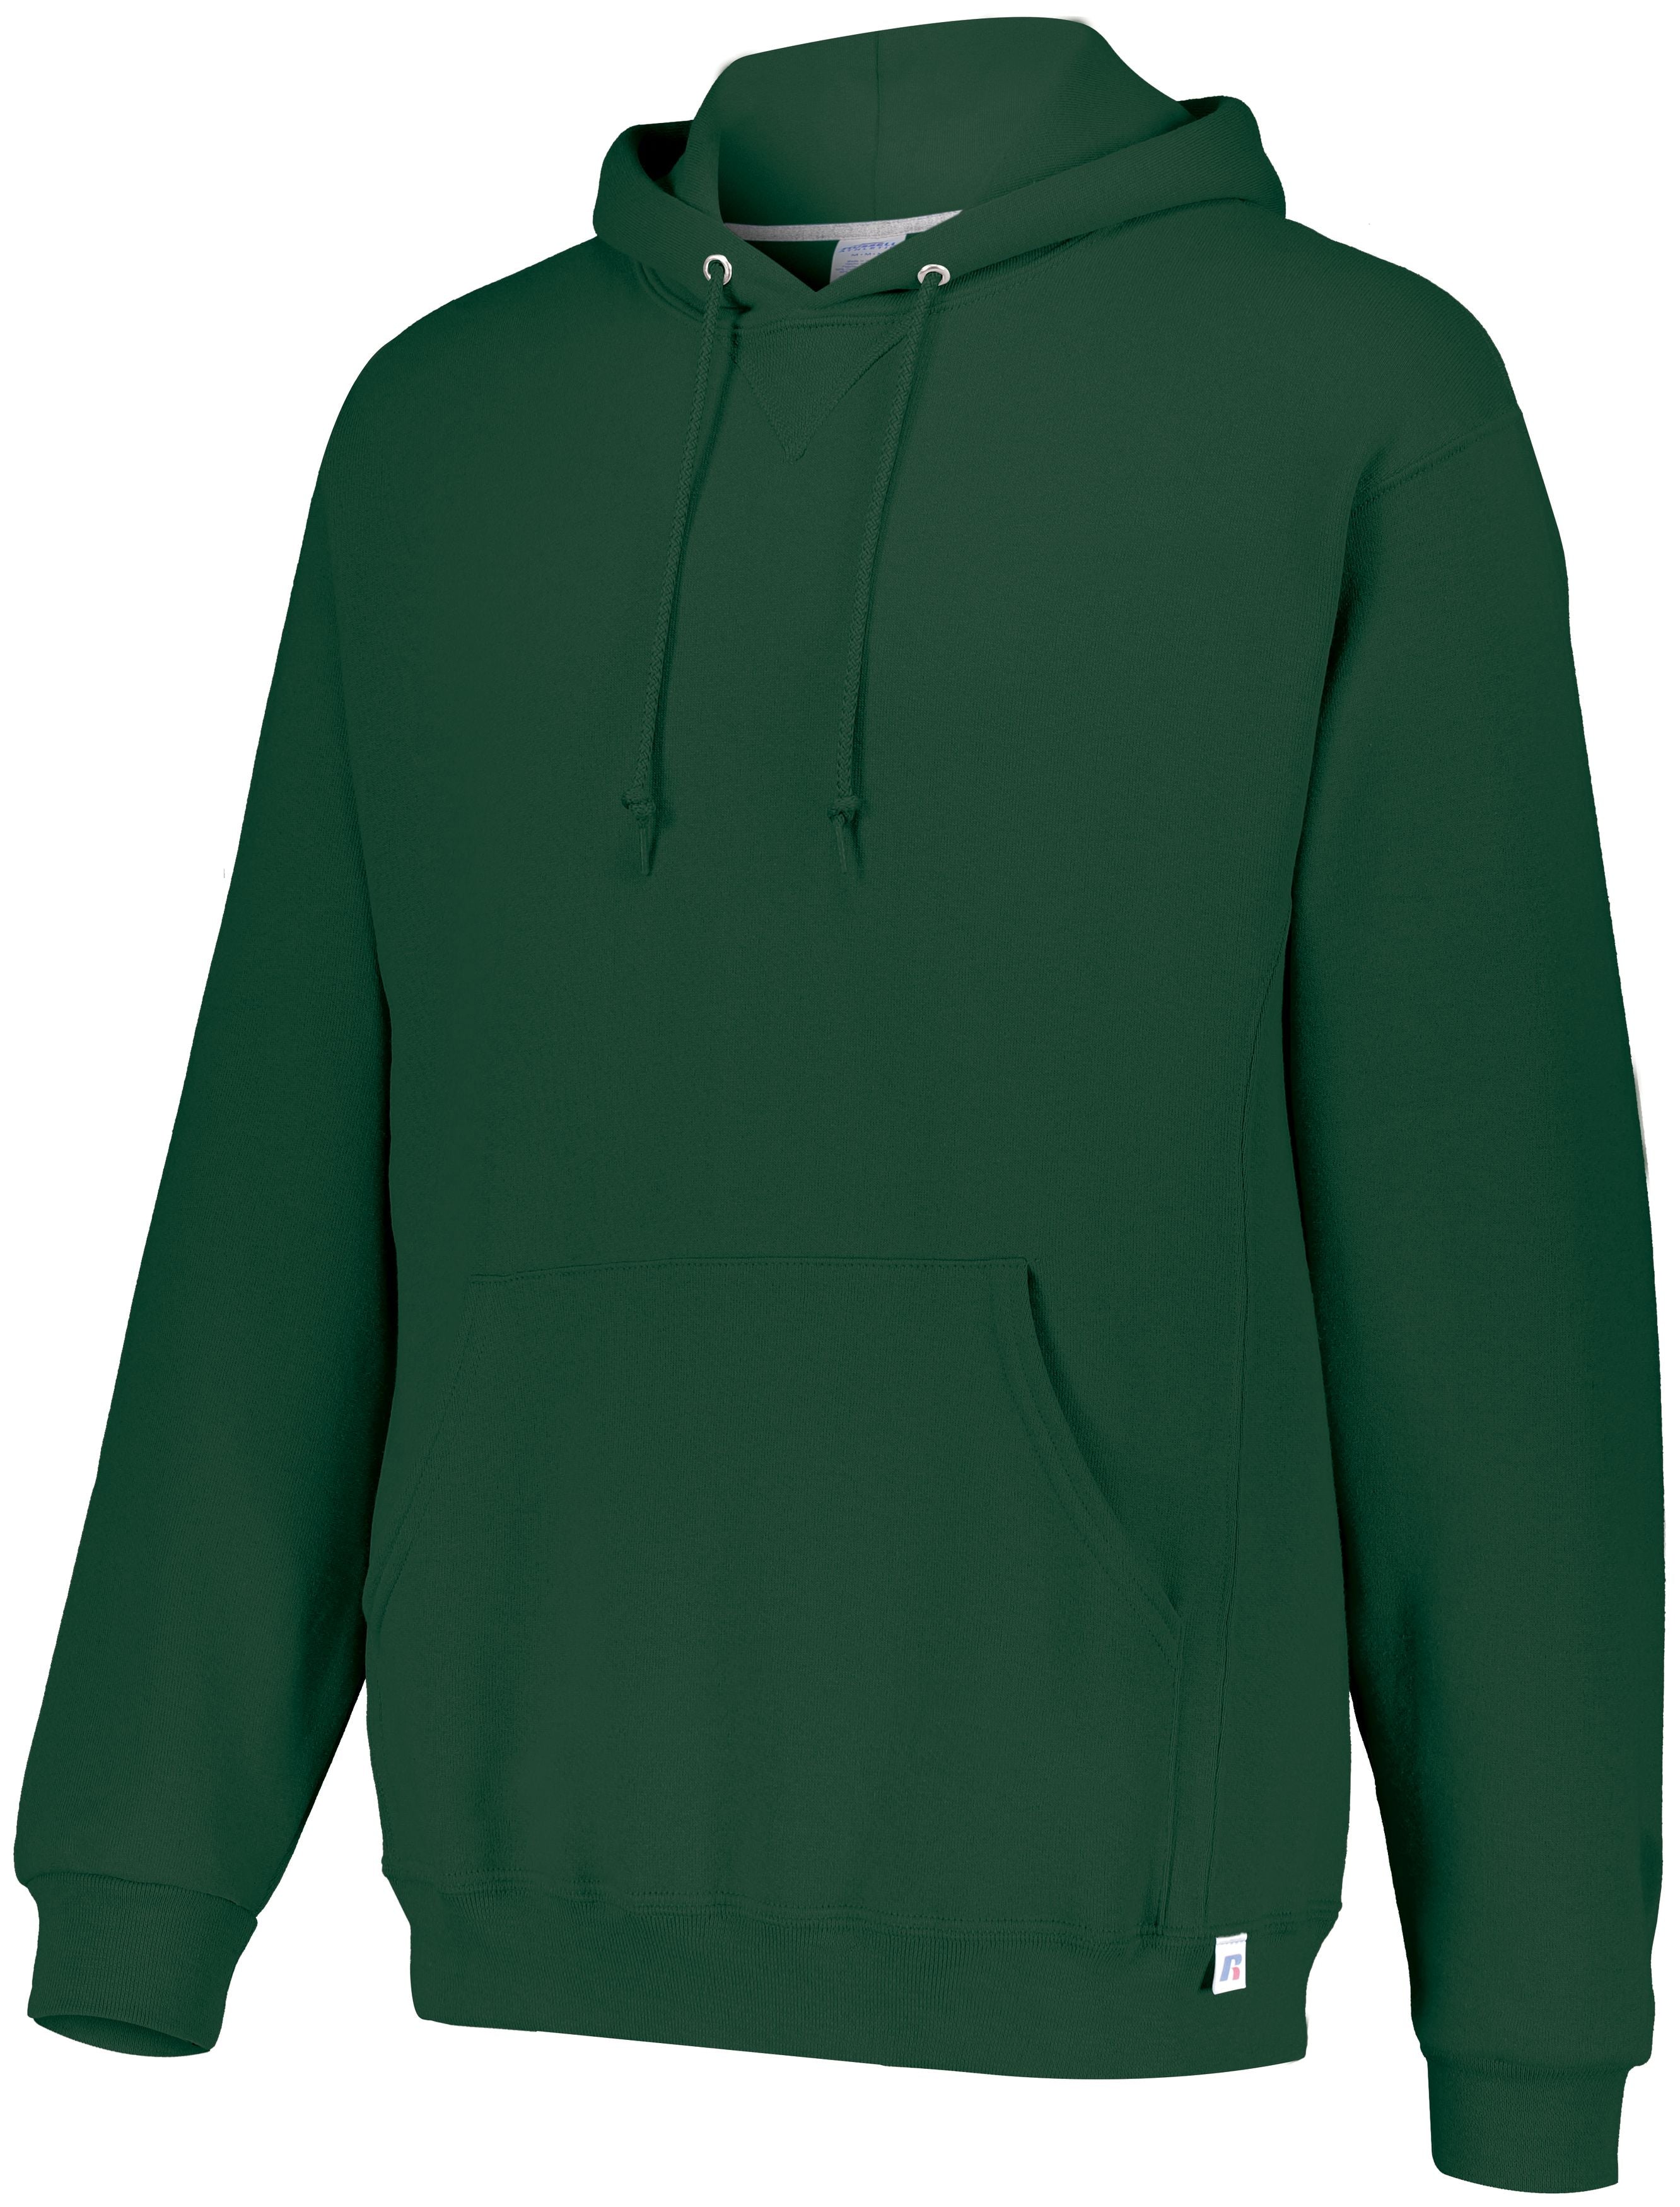 Russell Athletic Dri-Power Fleece Hoodie in Dark Green  -Part of the Adult, Russell-Athletic-Products, Shirts product lines at KanaleyCreations.com